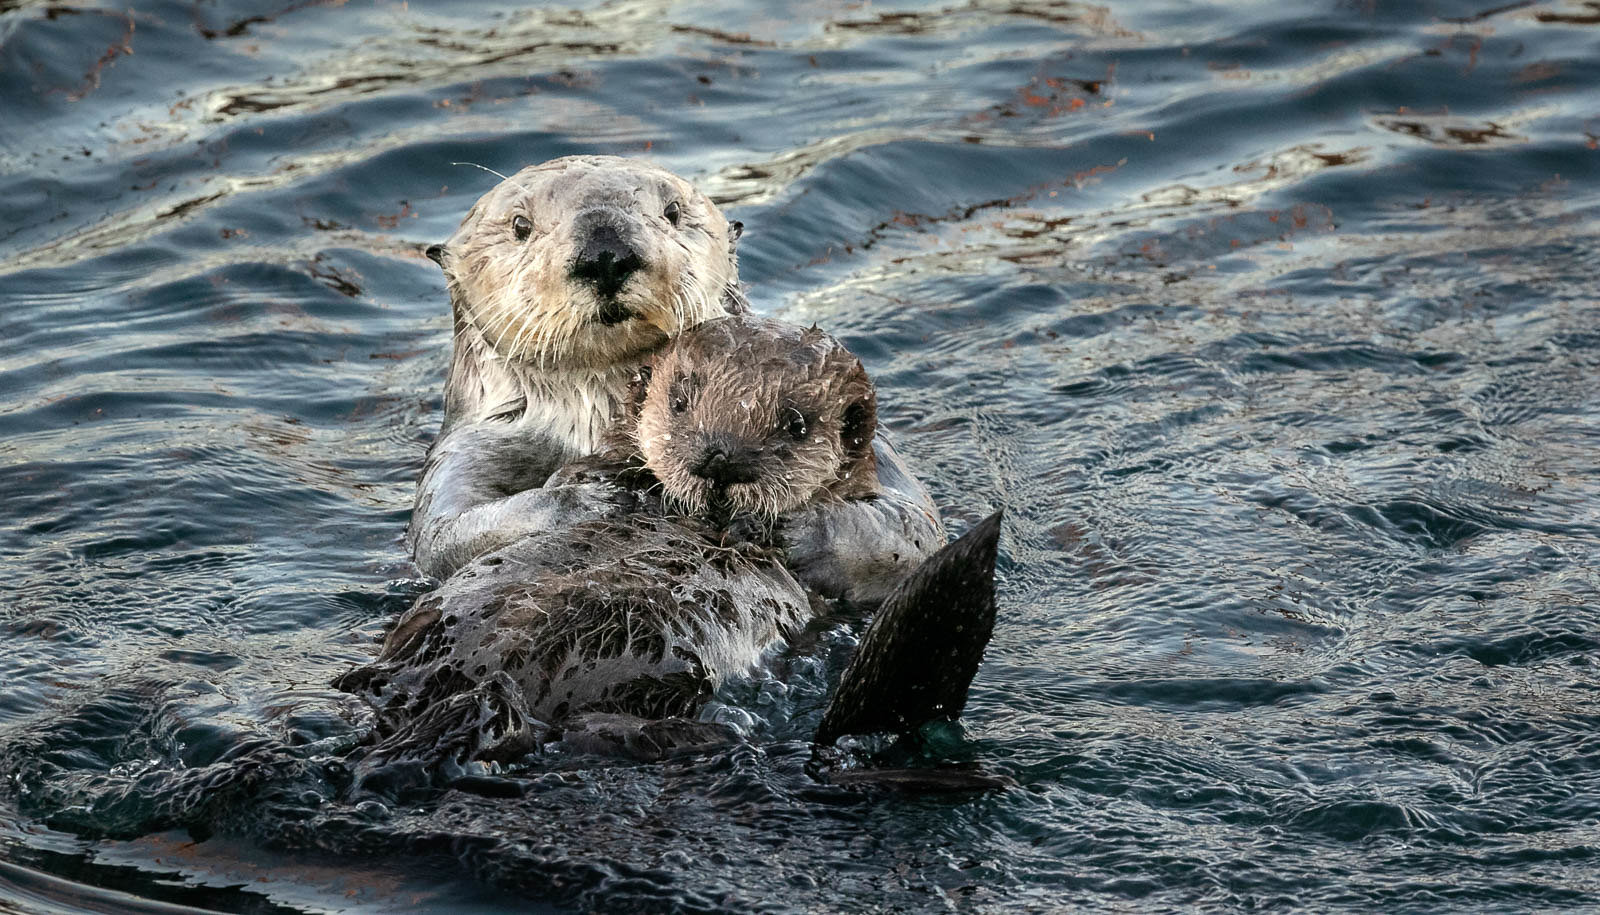 A sea otter cradles her young - very cute